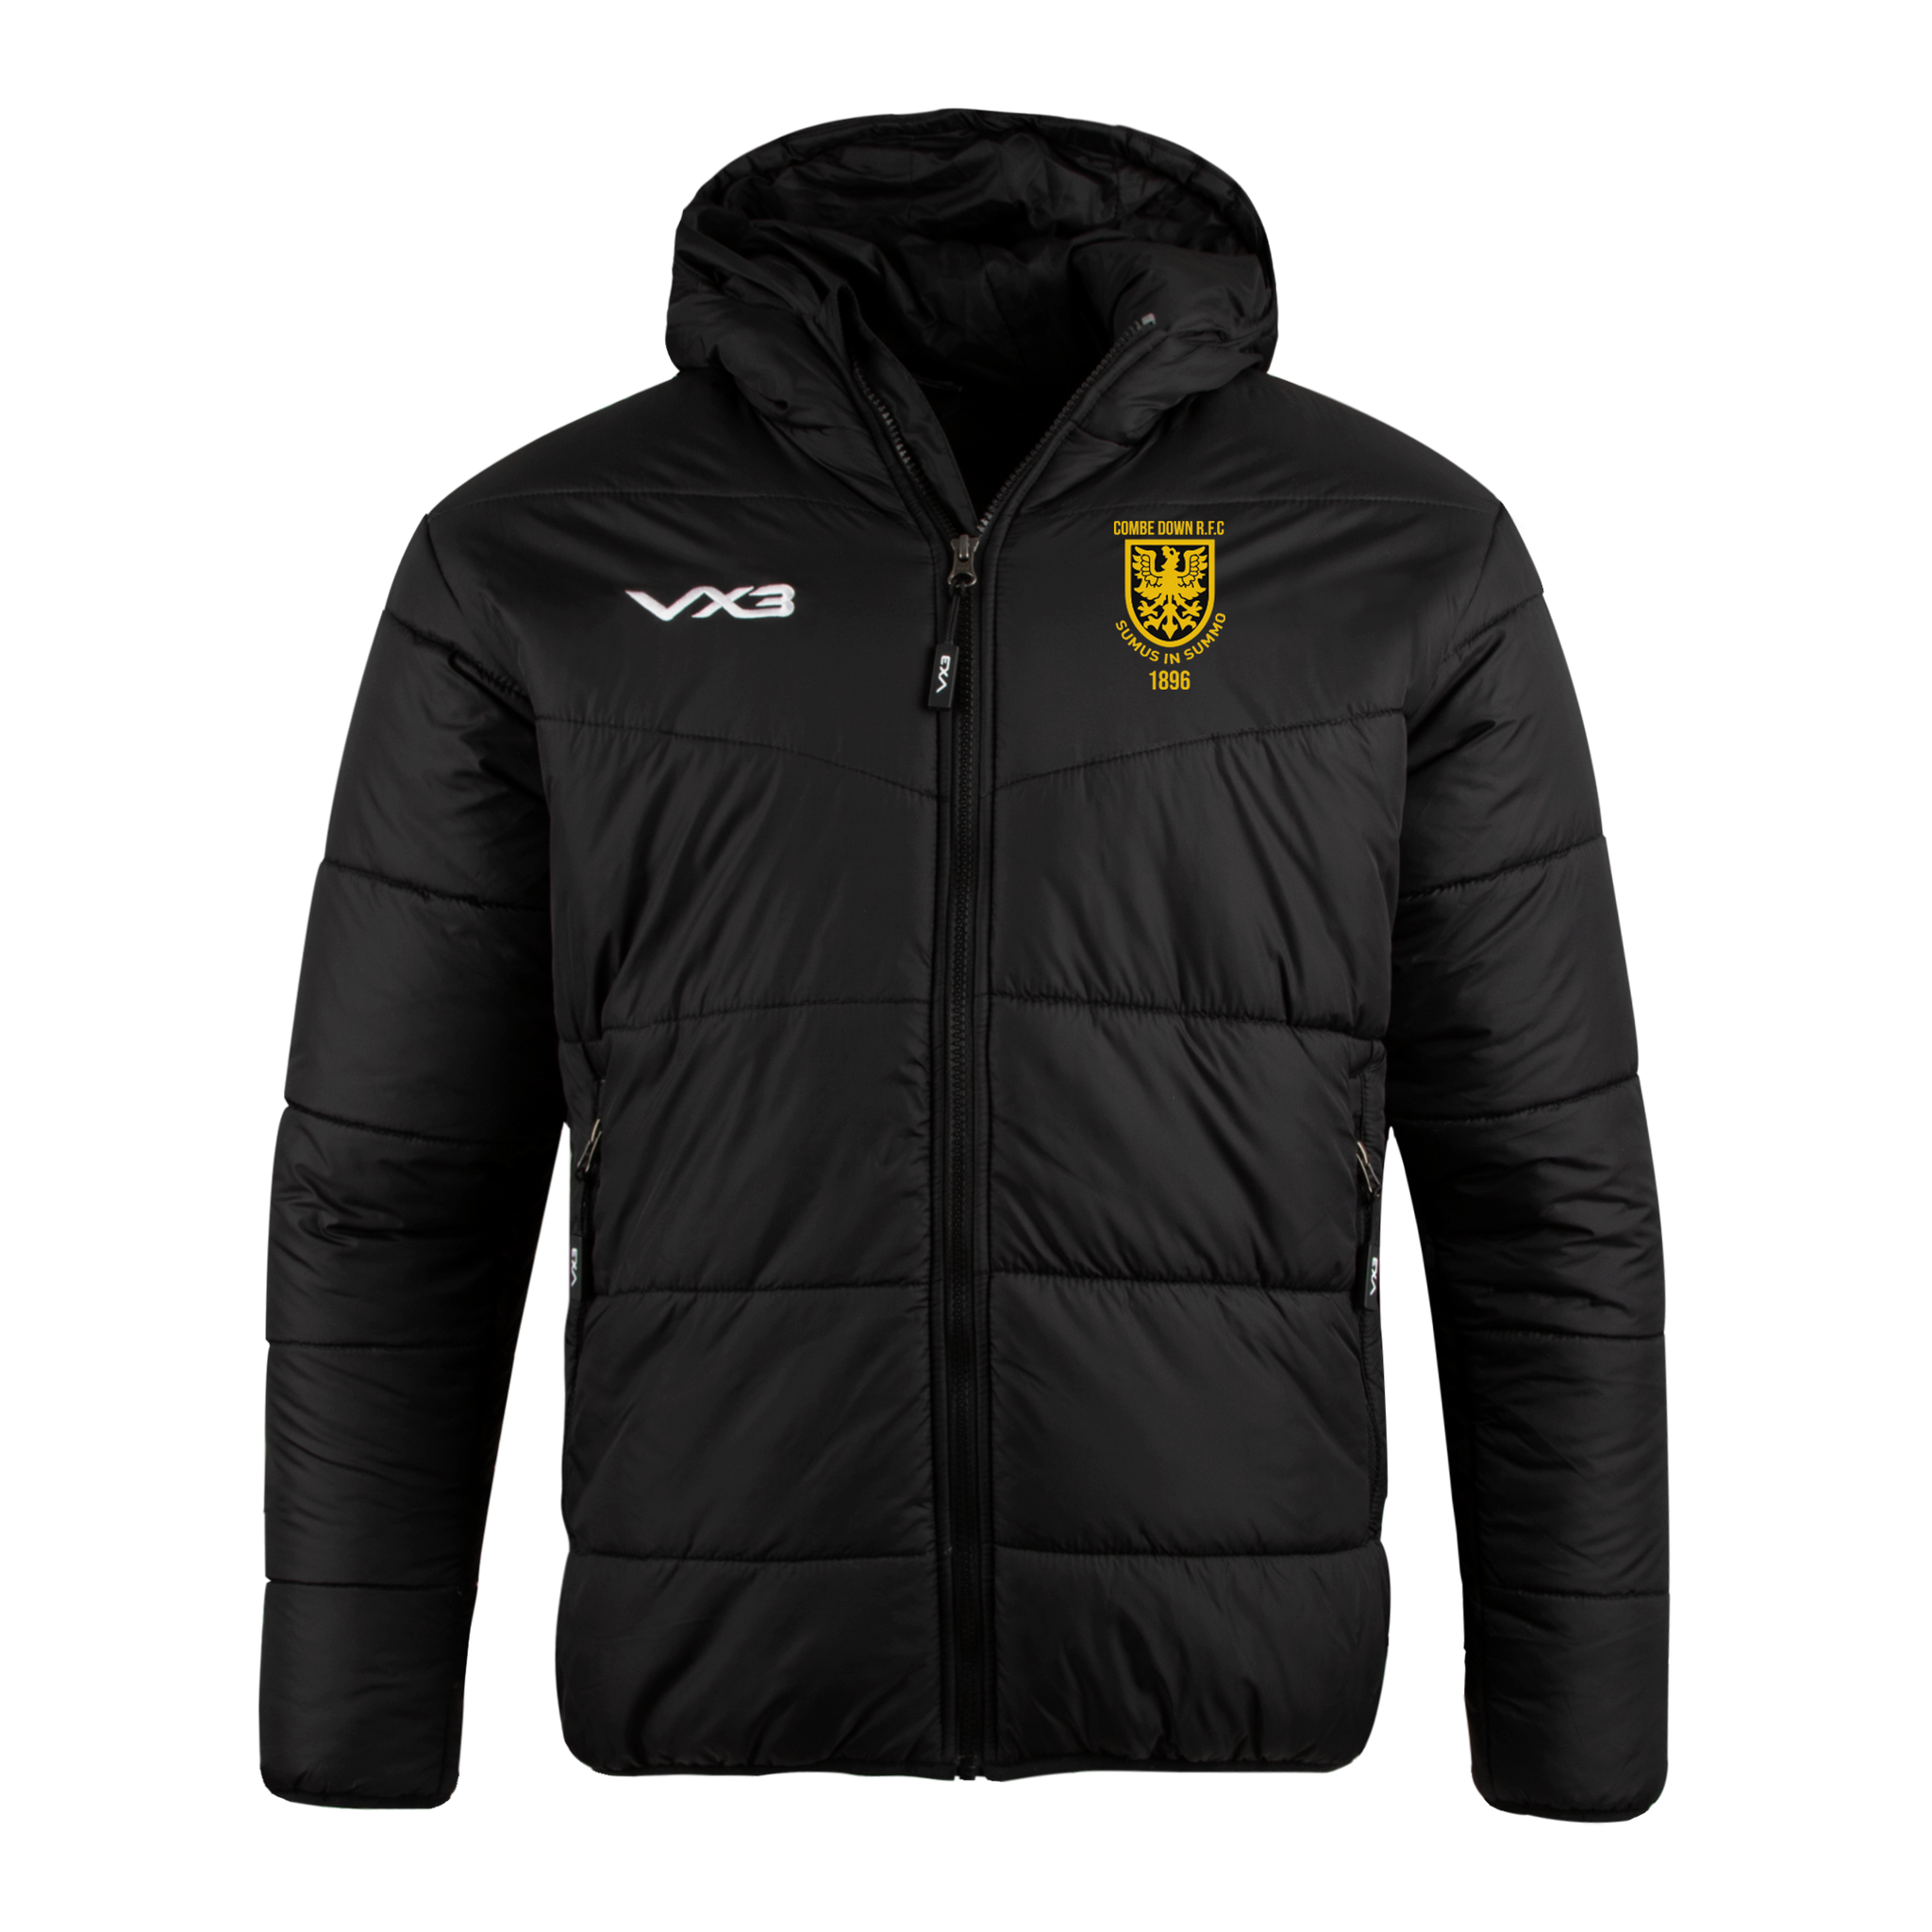 Combe Down RFC Lorica Quilted Jacket